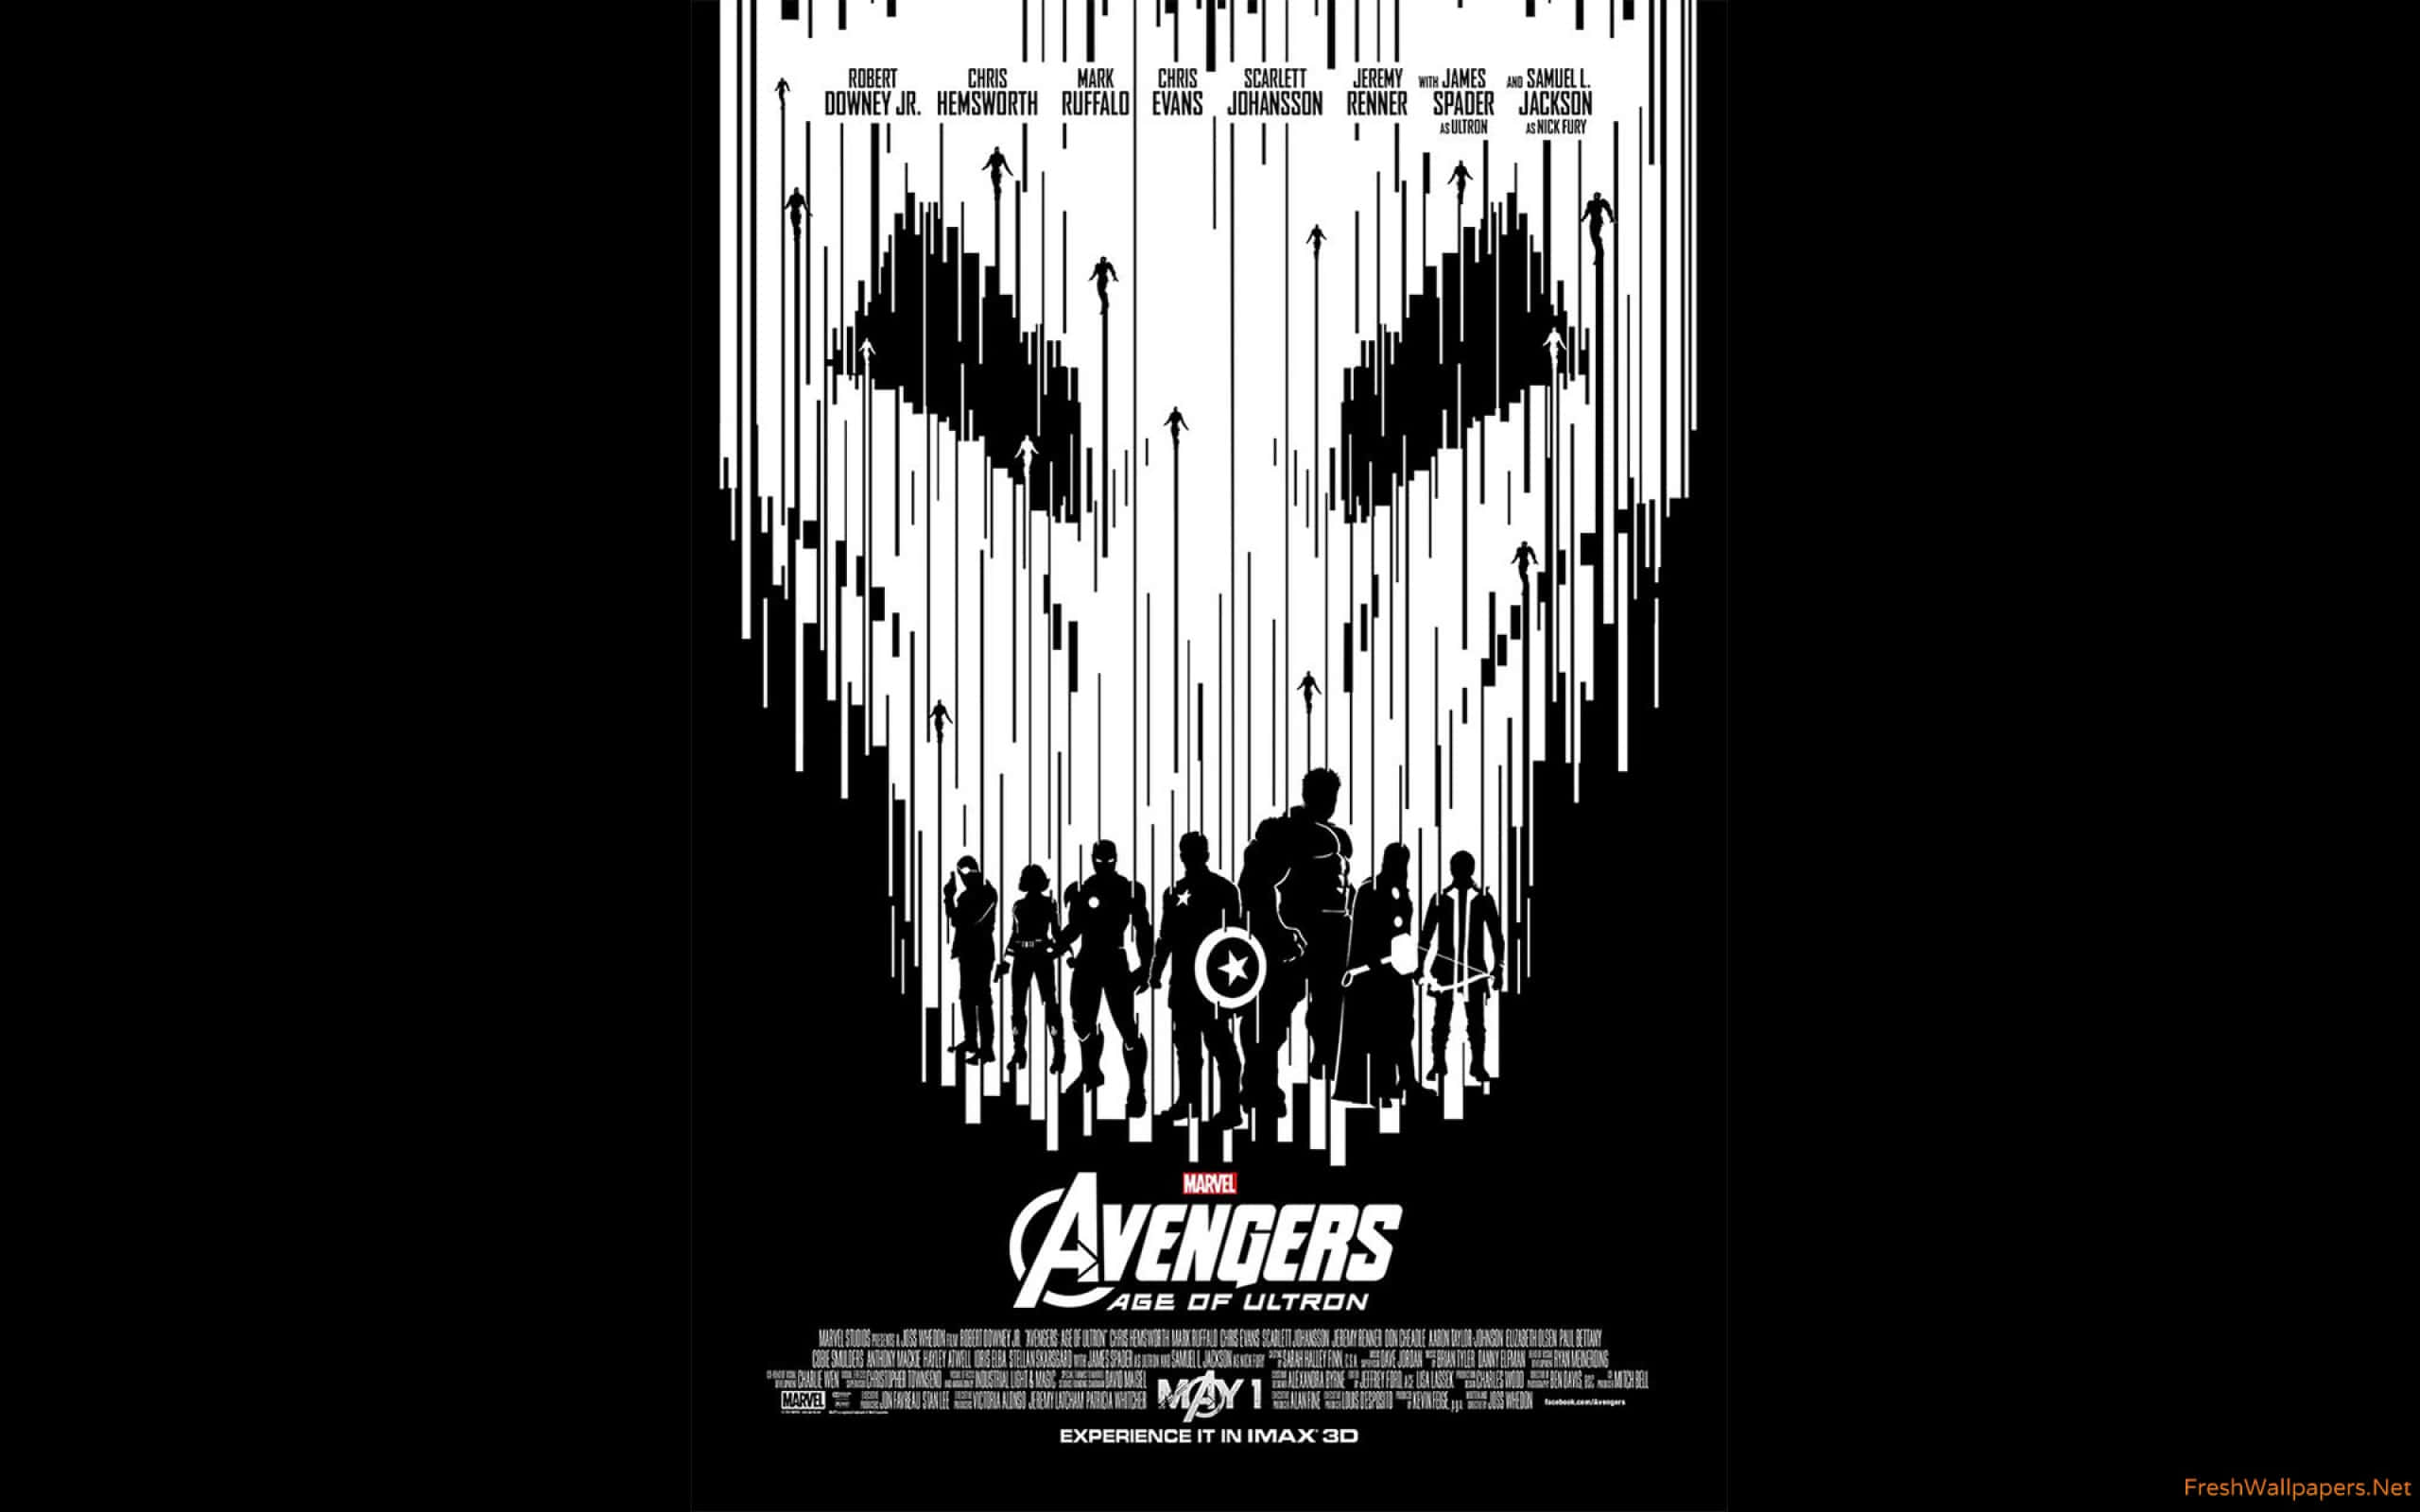 Marvel Universe illustrated in a striking black and white tone Wallpaper